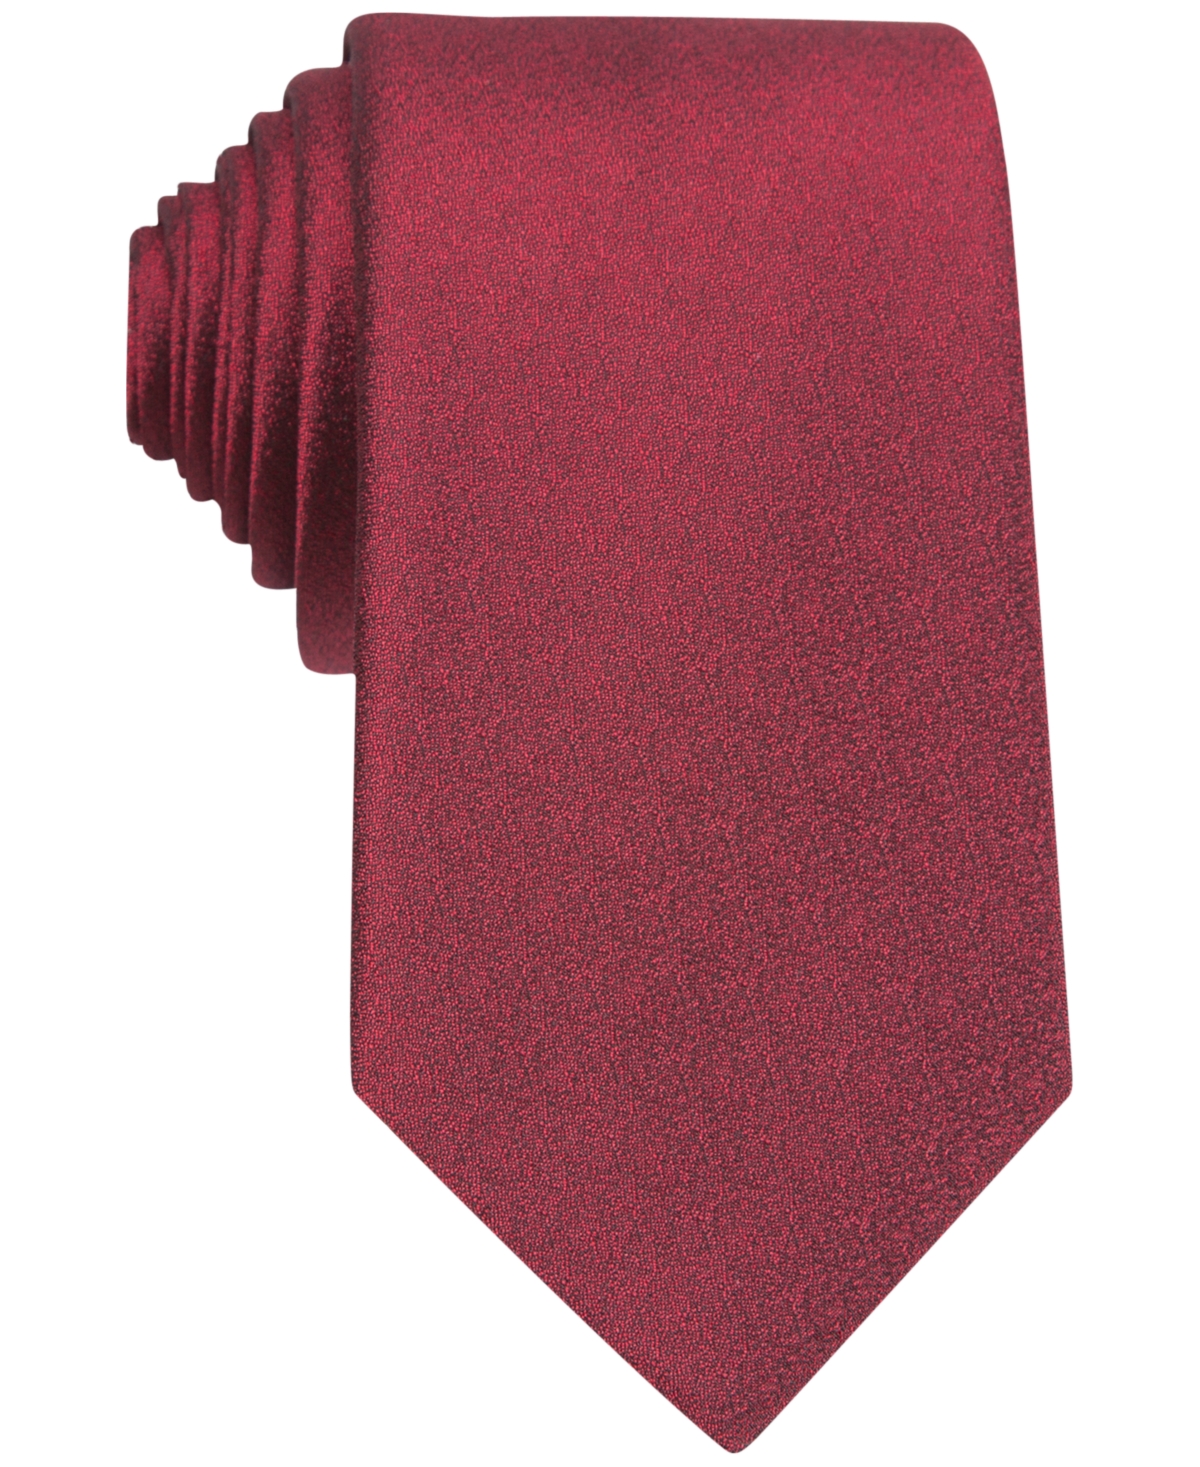 Sable Solid Tie, Created for Macy's - Red